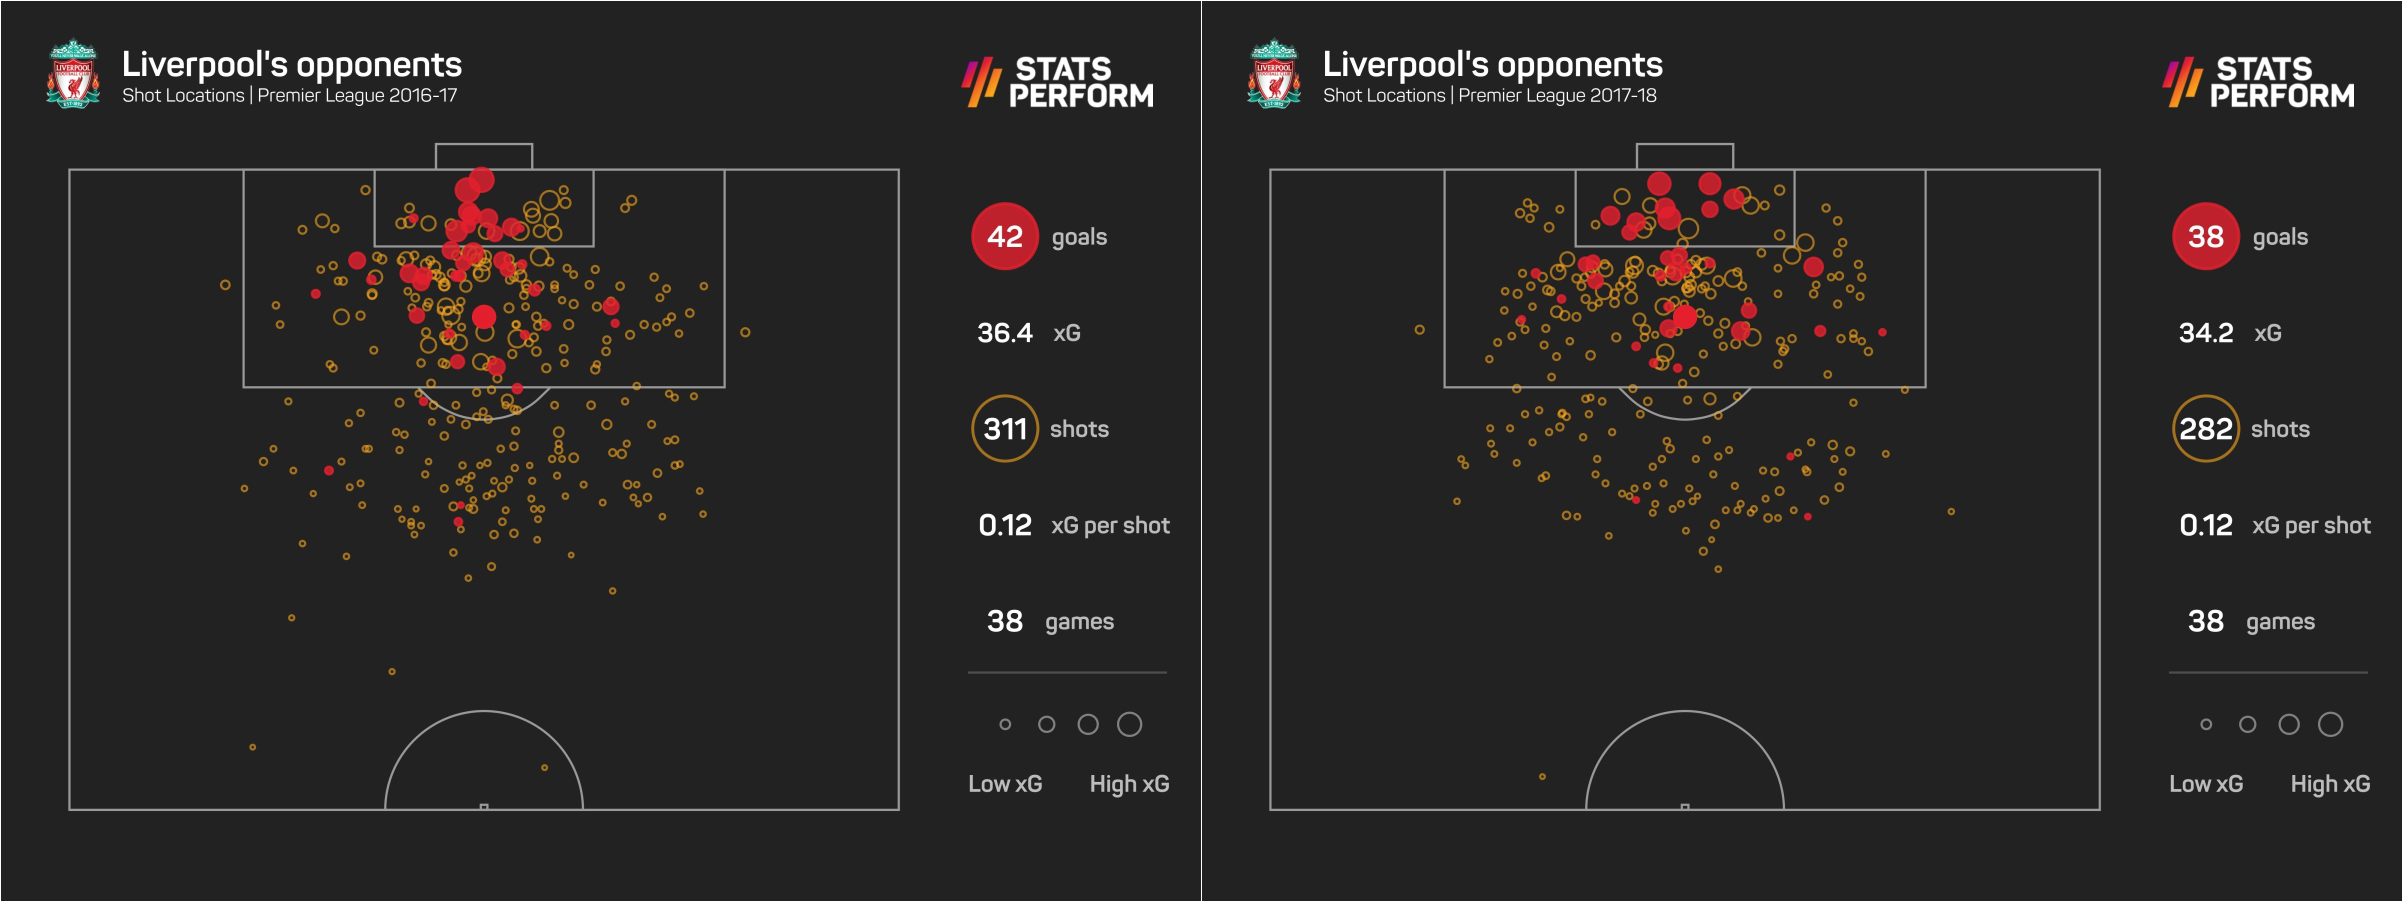 Liverpool shots faced from 2016-17 to 2017-18